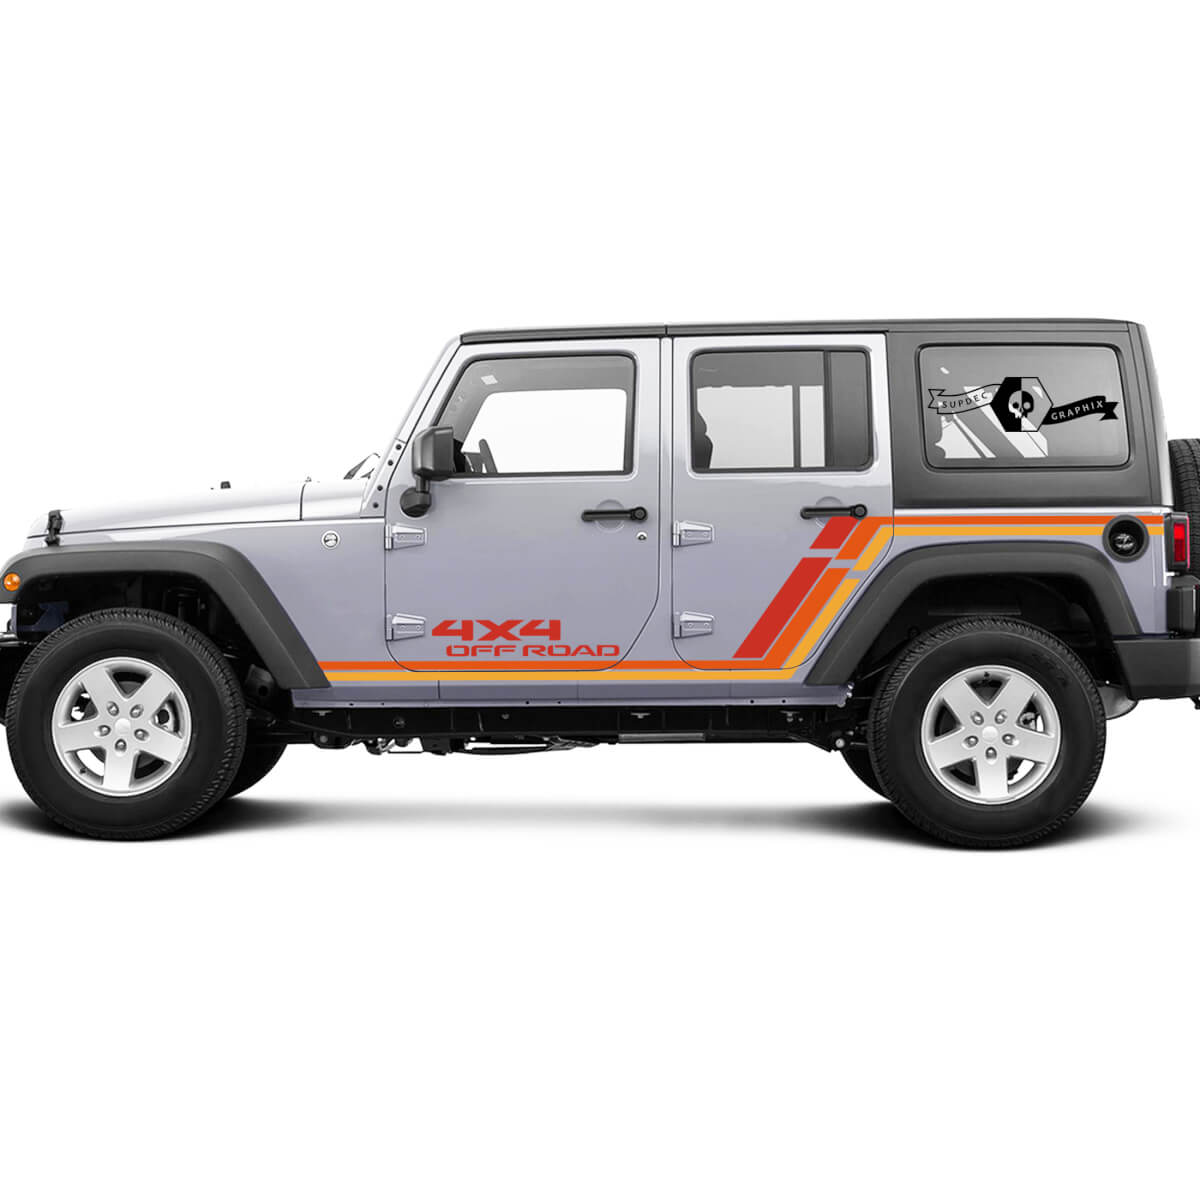 Jeep Rubicon Retro Vintage 4x4 Off-Road 4 doors racing stripe kit long Off Road Graphic Kits